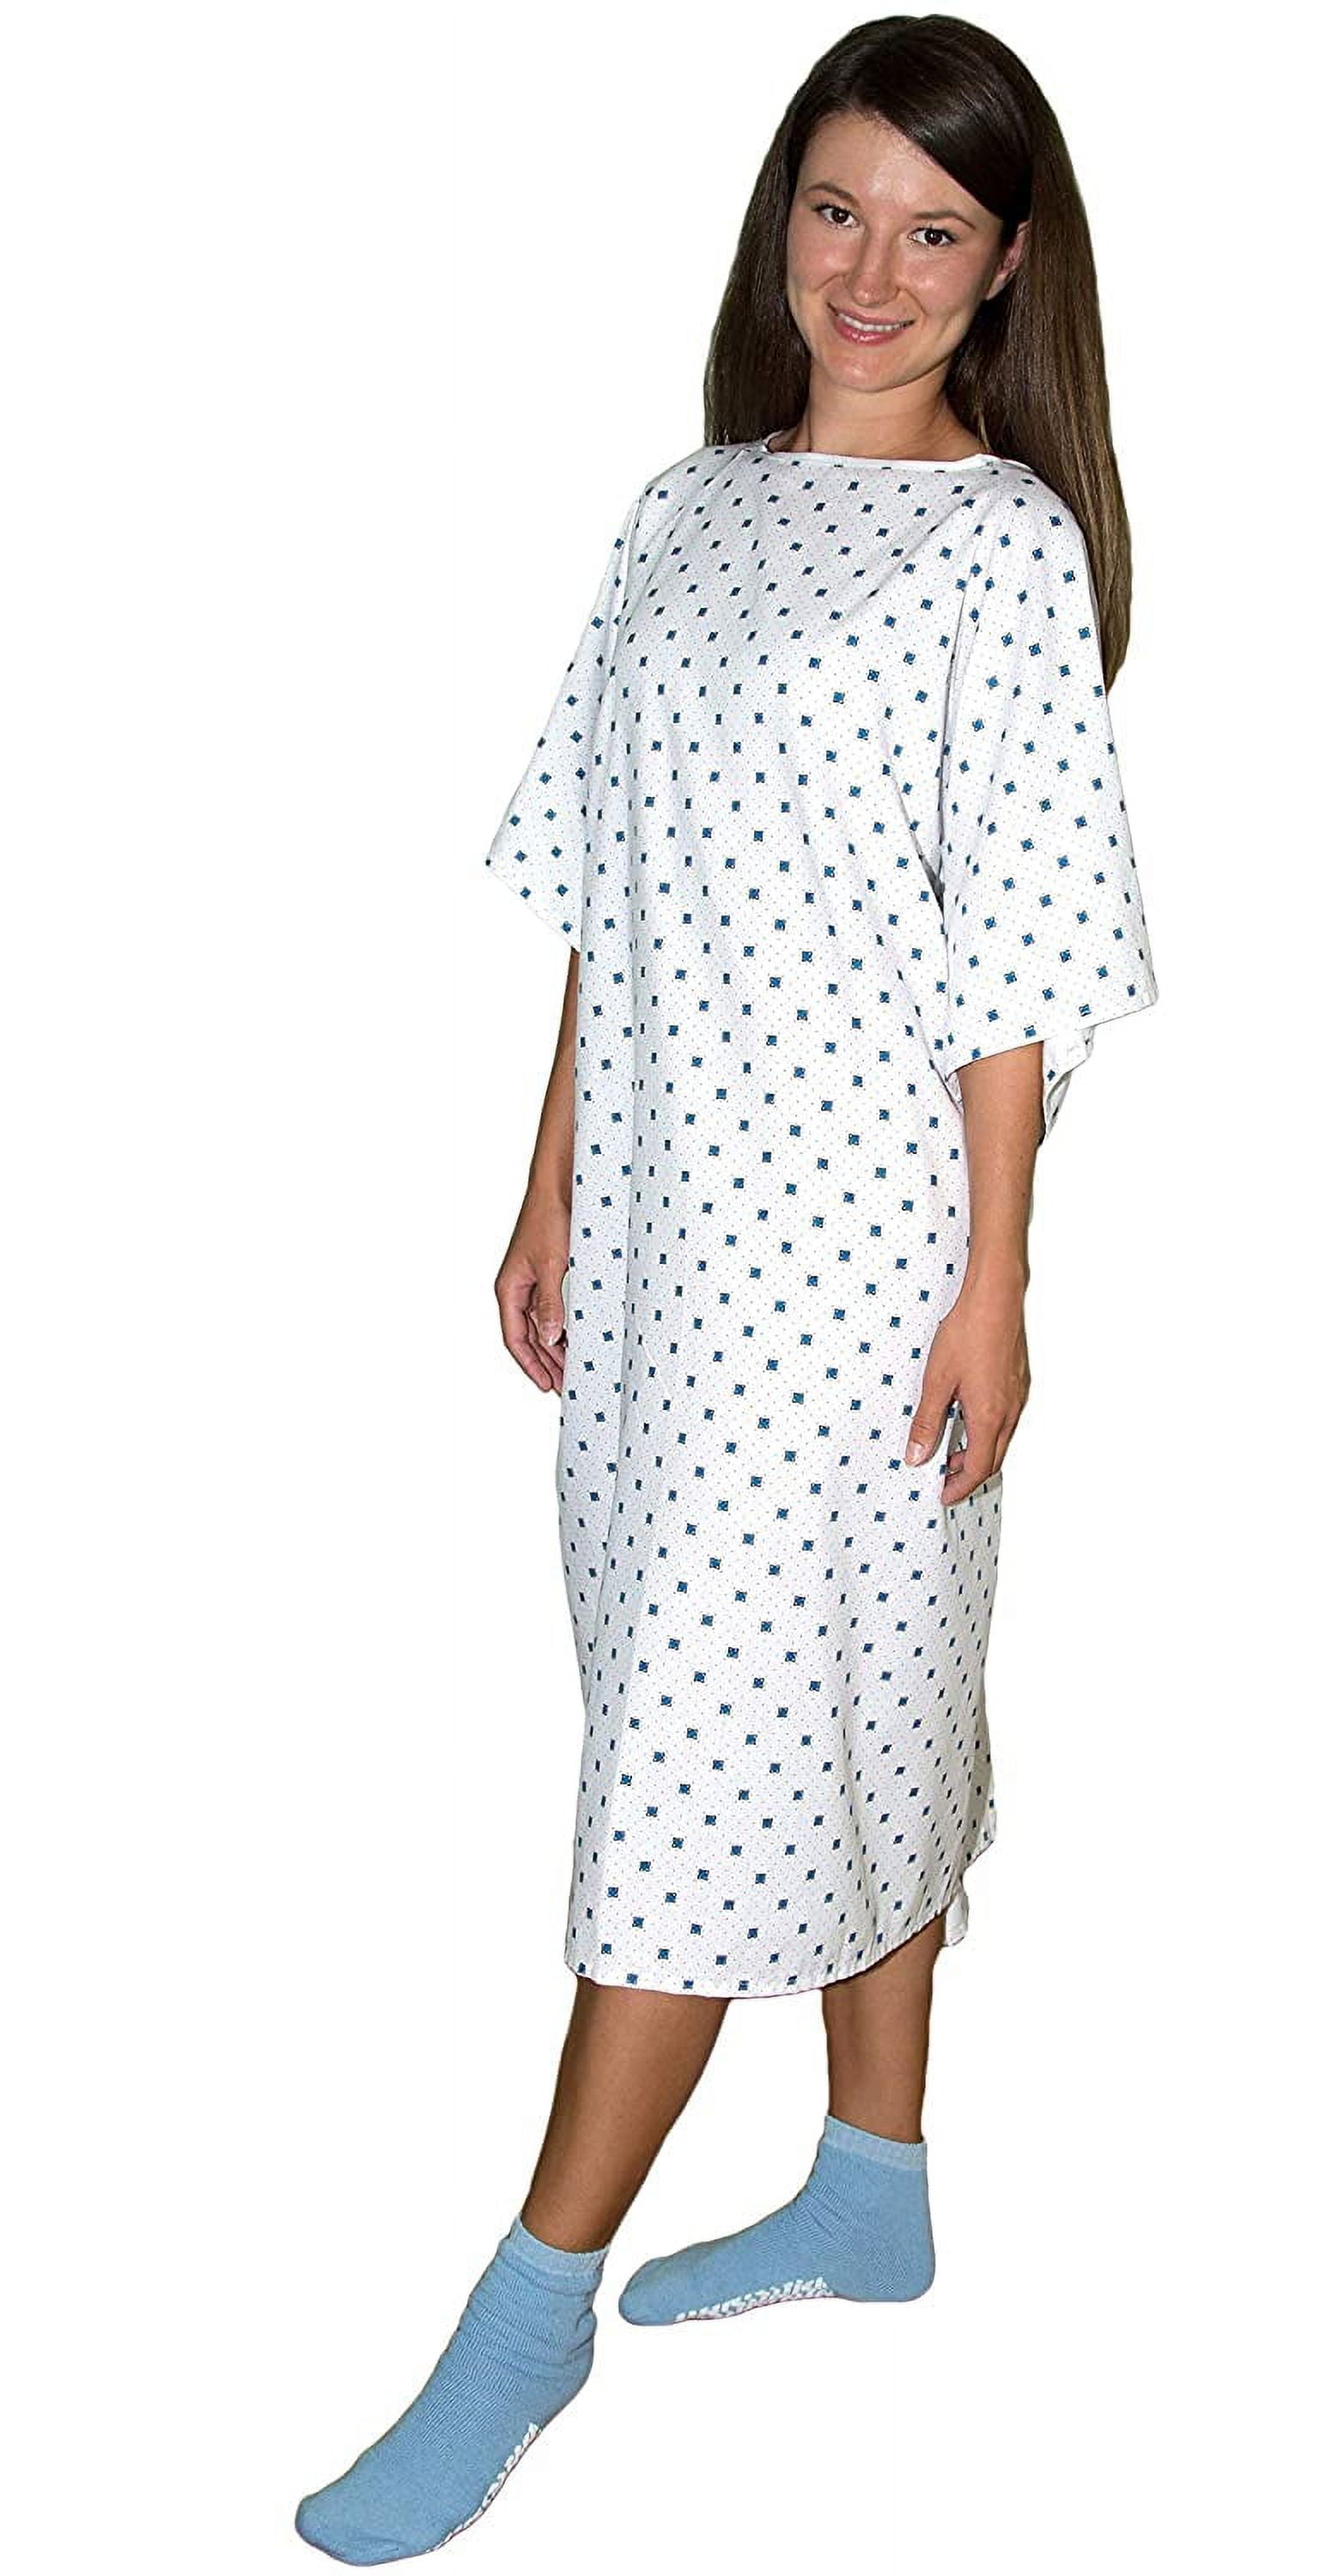 Elivo Ultra Soft Hospital Gown - Professional Surgical Gown